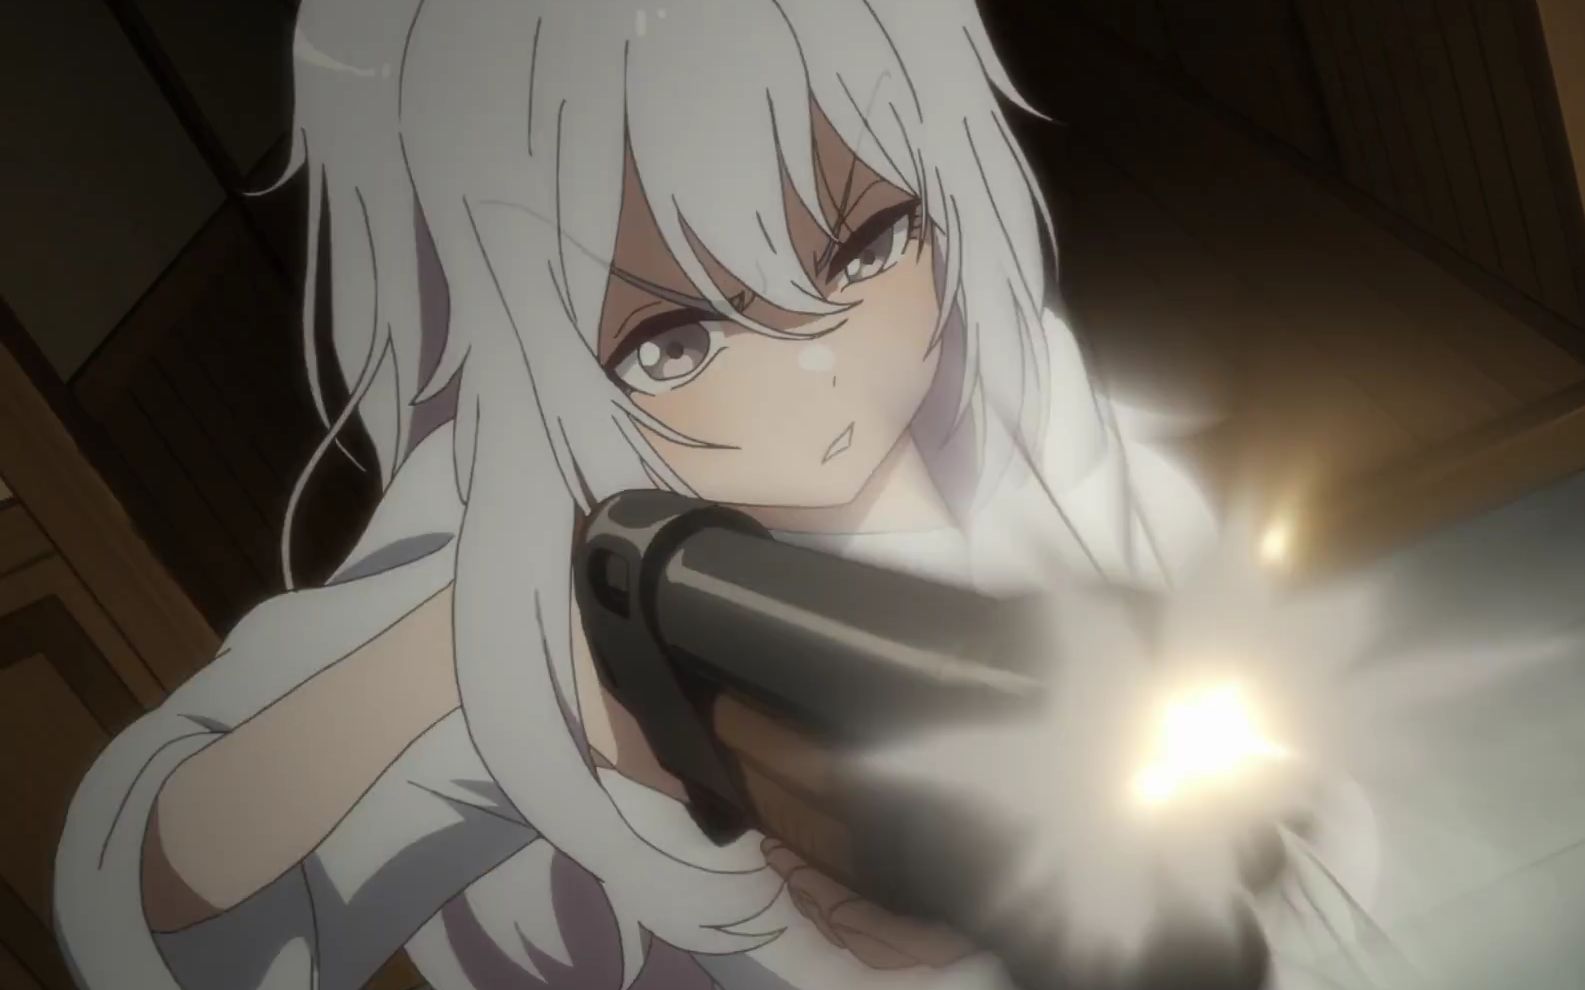 Who could refuse a white-haired girl with gun? - Bilibili